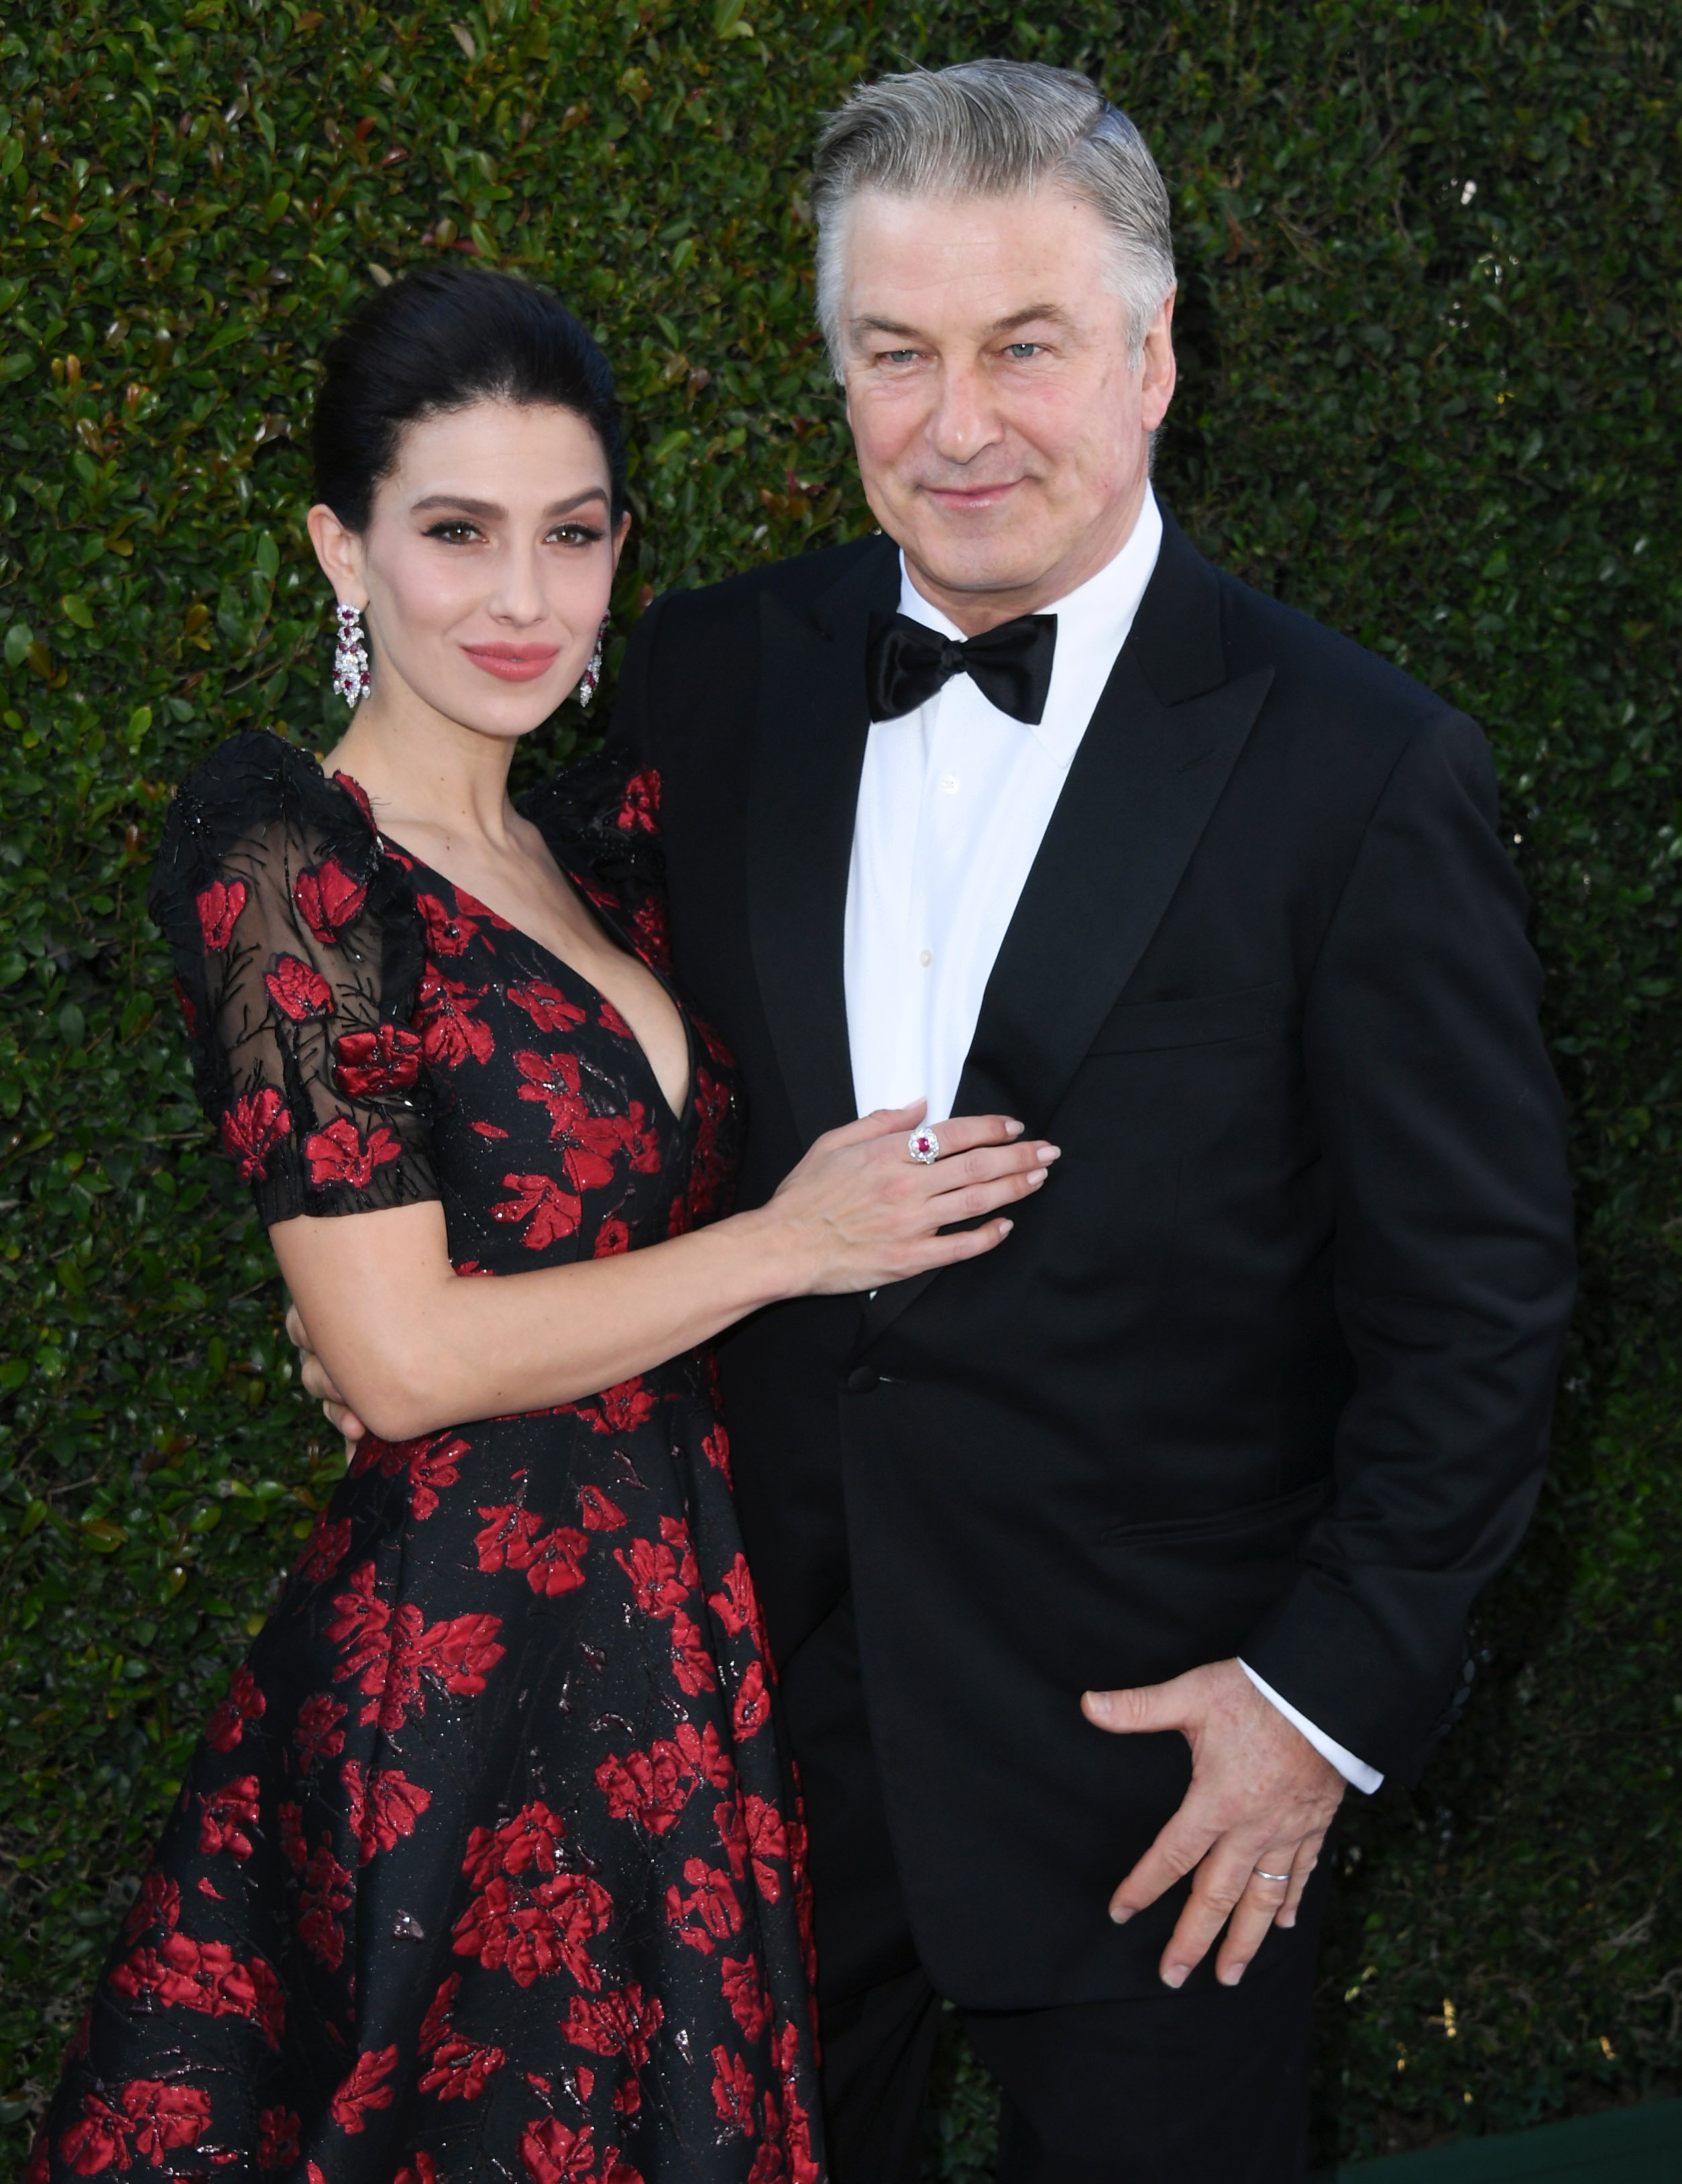 Hilaria Baldwin and Alec Baldwin attend 25th Annual Screen Actors Guild Awards at The Shrine Auditorium on January 27, 2019, in Los Angeles, California. | Photo: Getty Images